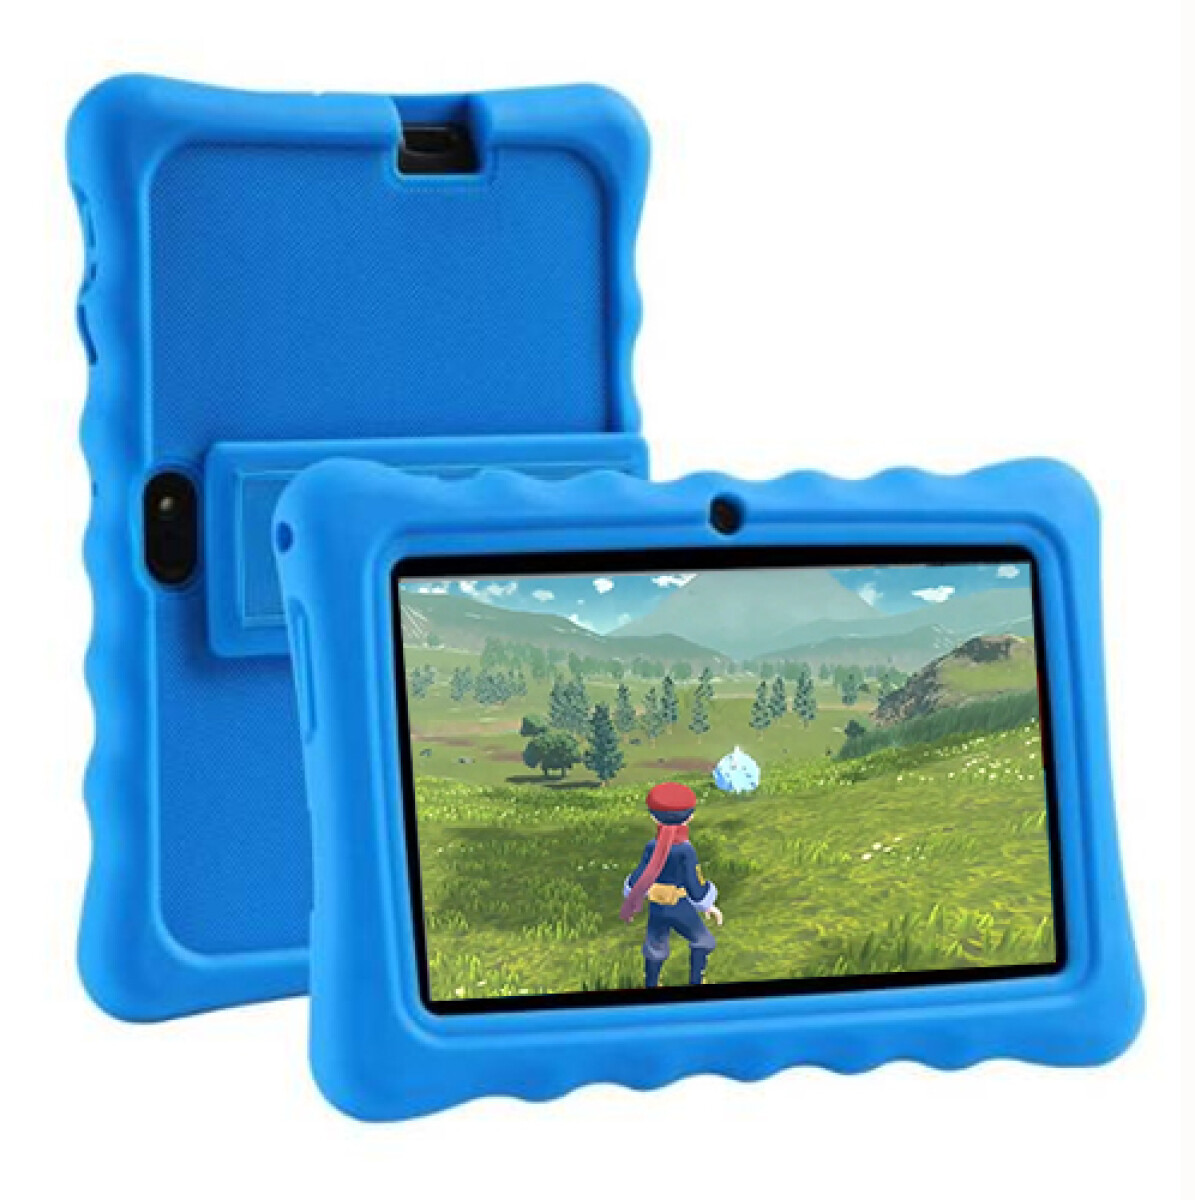 TABLET INTOUCH 7” -Q22 Kid´s Story 3G -1G 16G - Sin color 